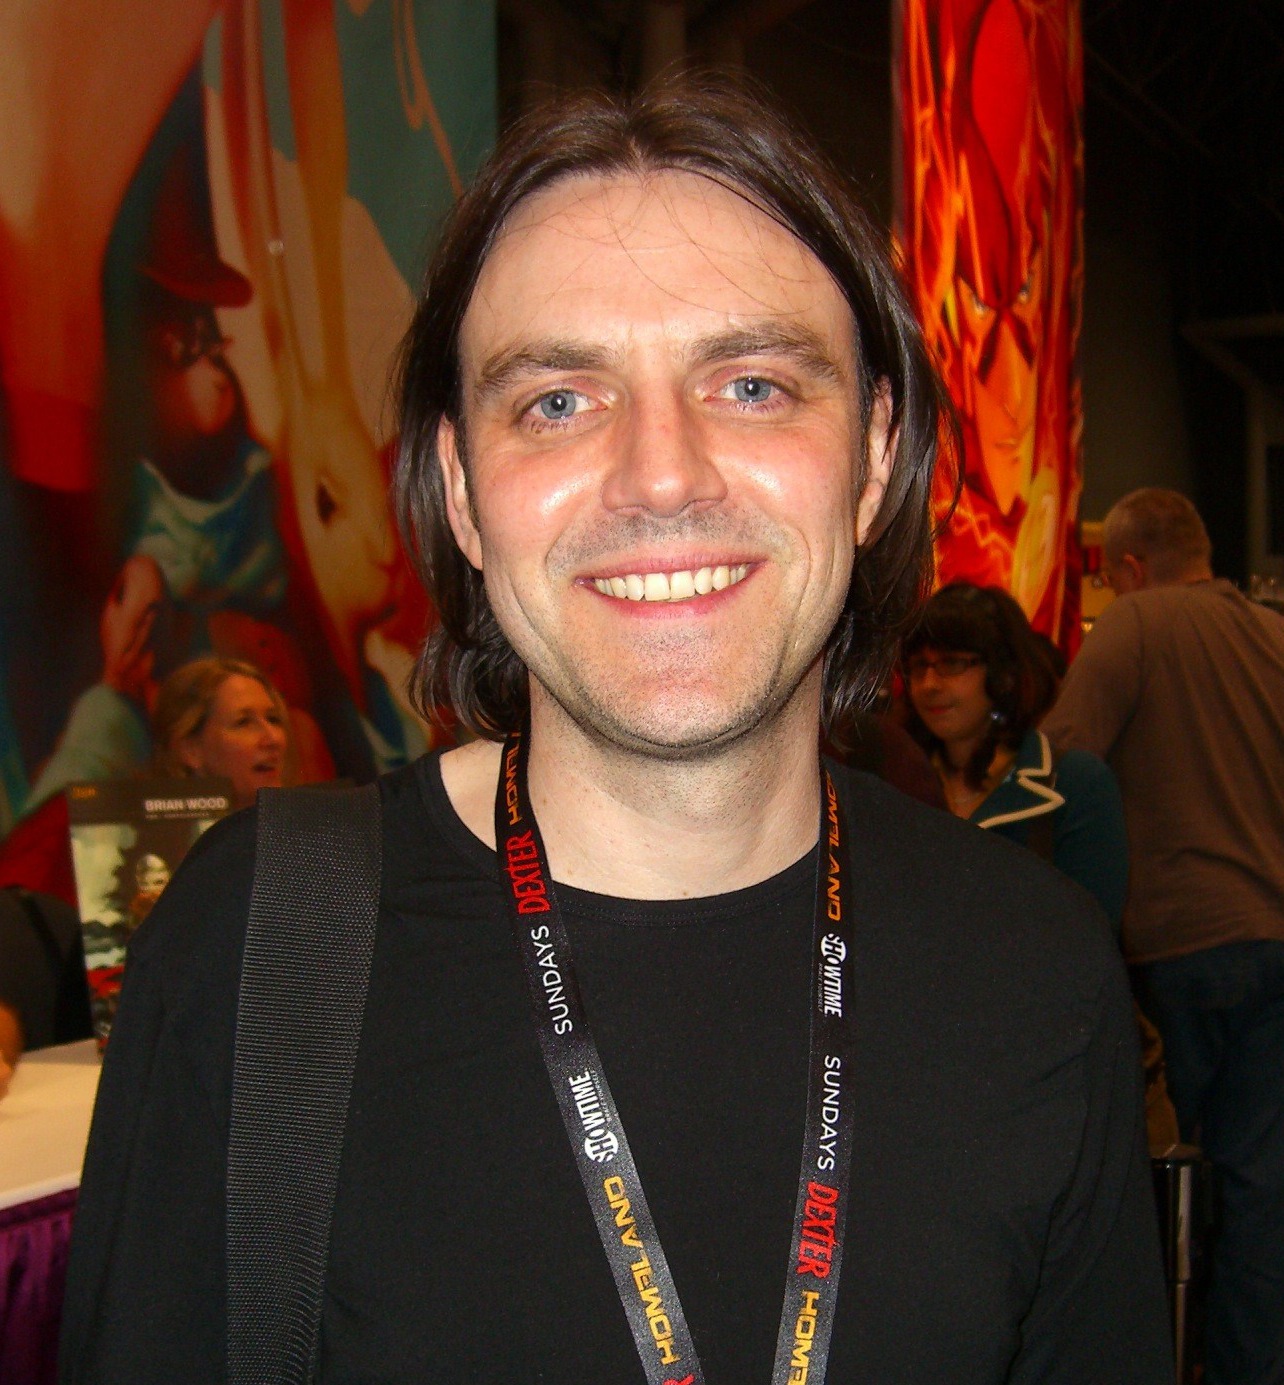 Quitely at the [[New York Comic Con]],<br> 14 October 2011